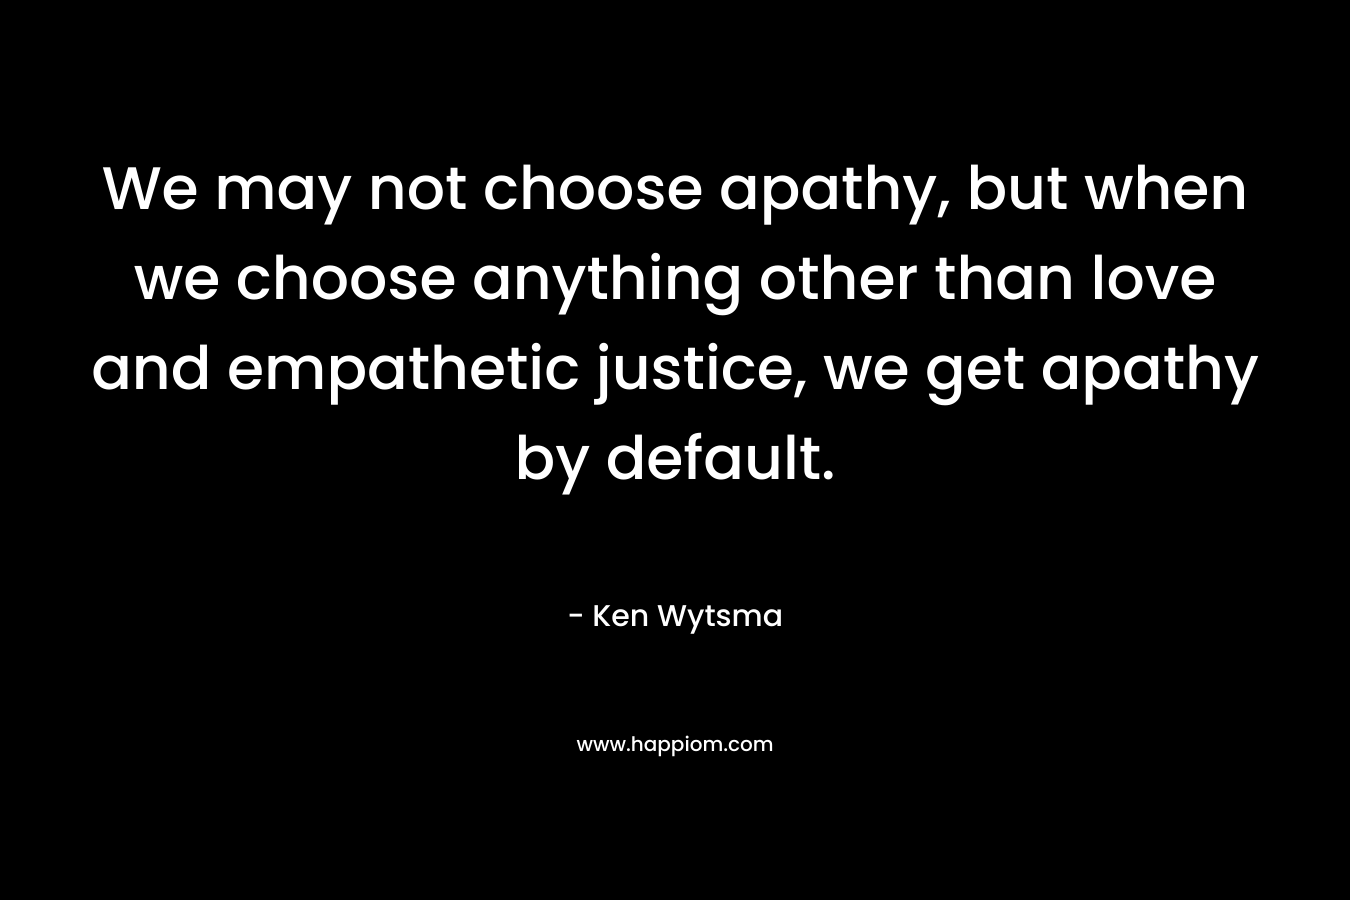 We may not choose apathy, but when we choose anything other than love and empathetic justice, we get apathy by default.